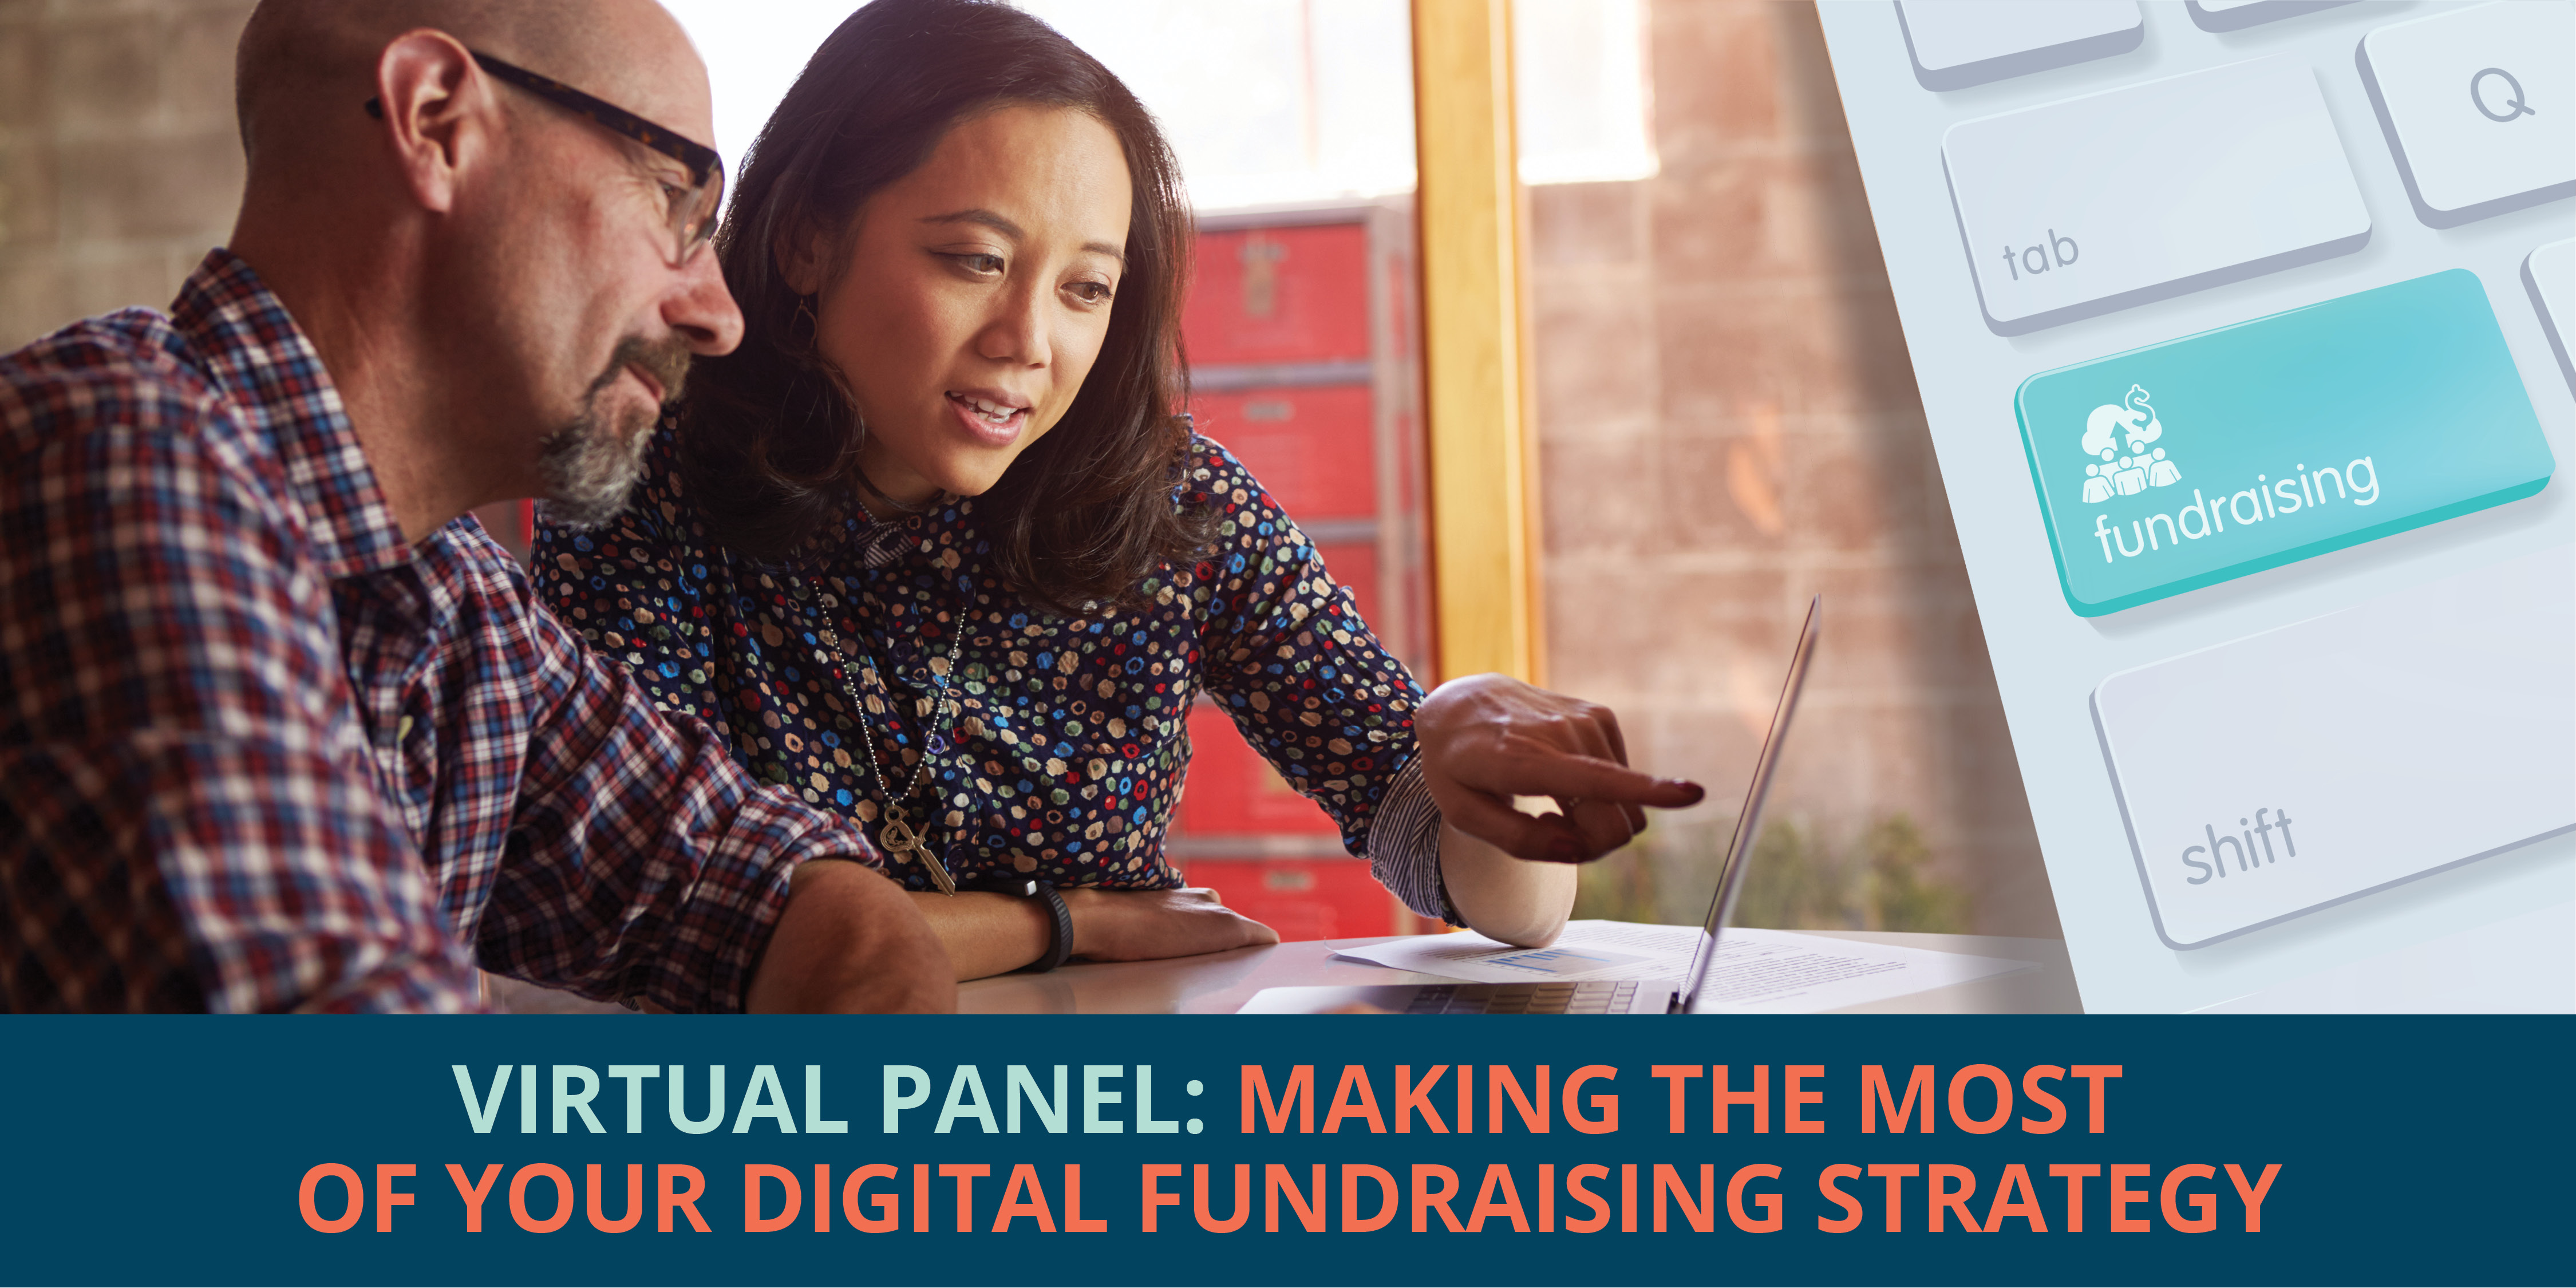 Virtual Panel: Making the Most of Your Digital Fundraising Strategy